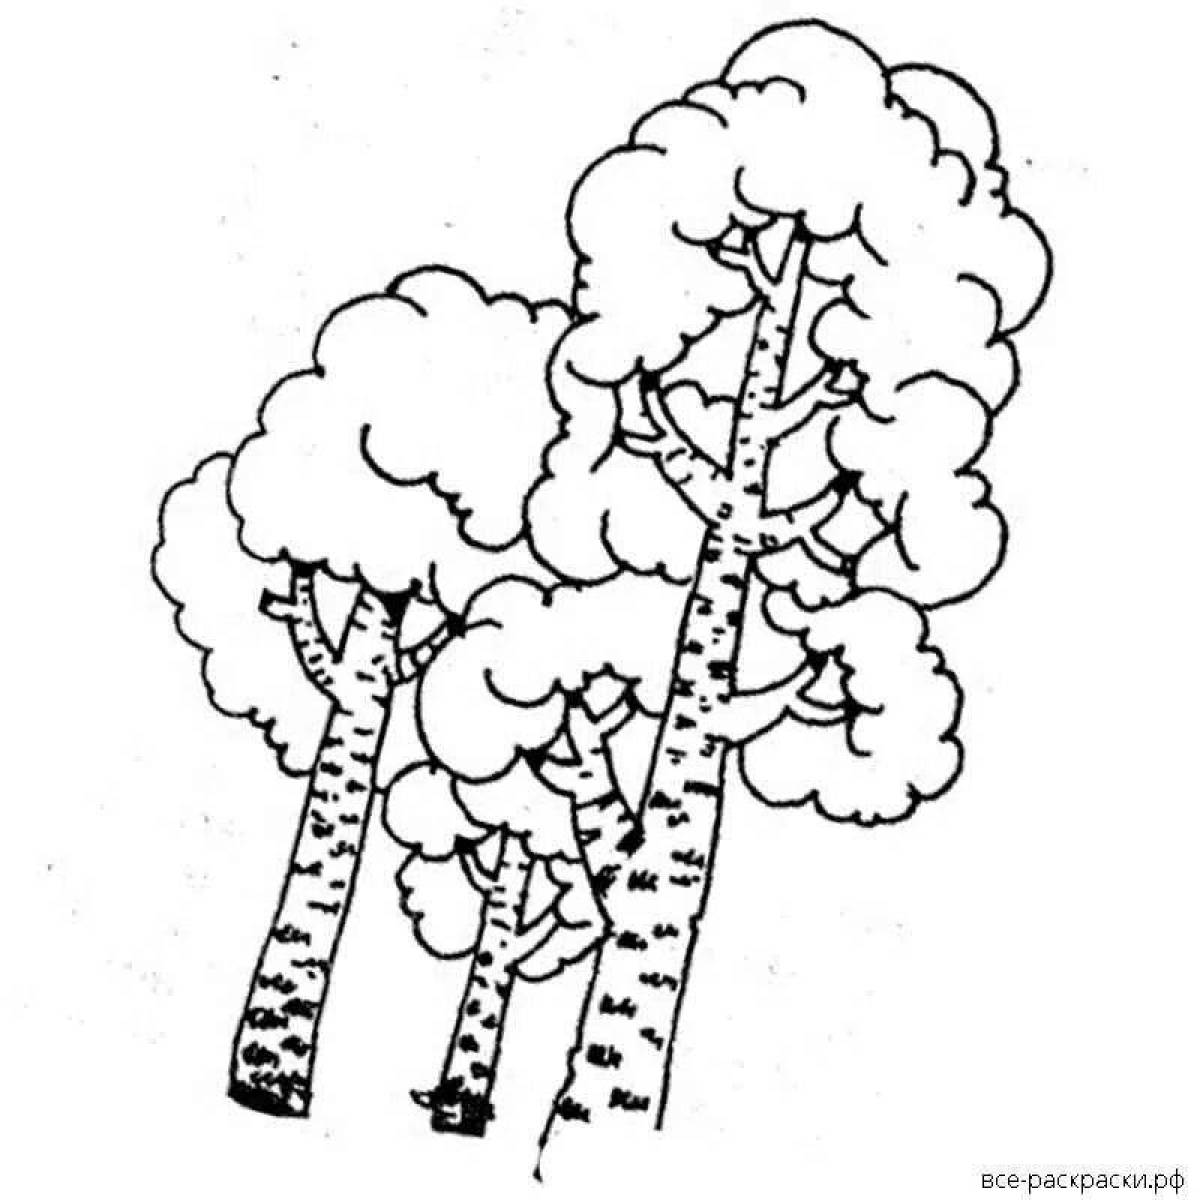 Luxury birch coloring page